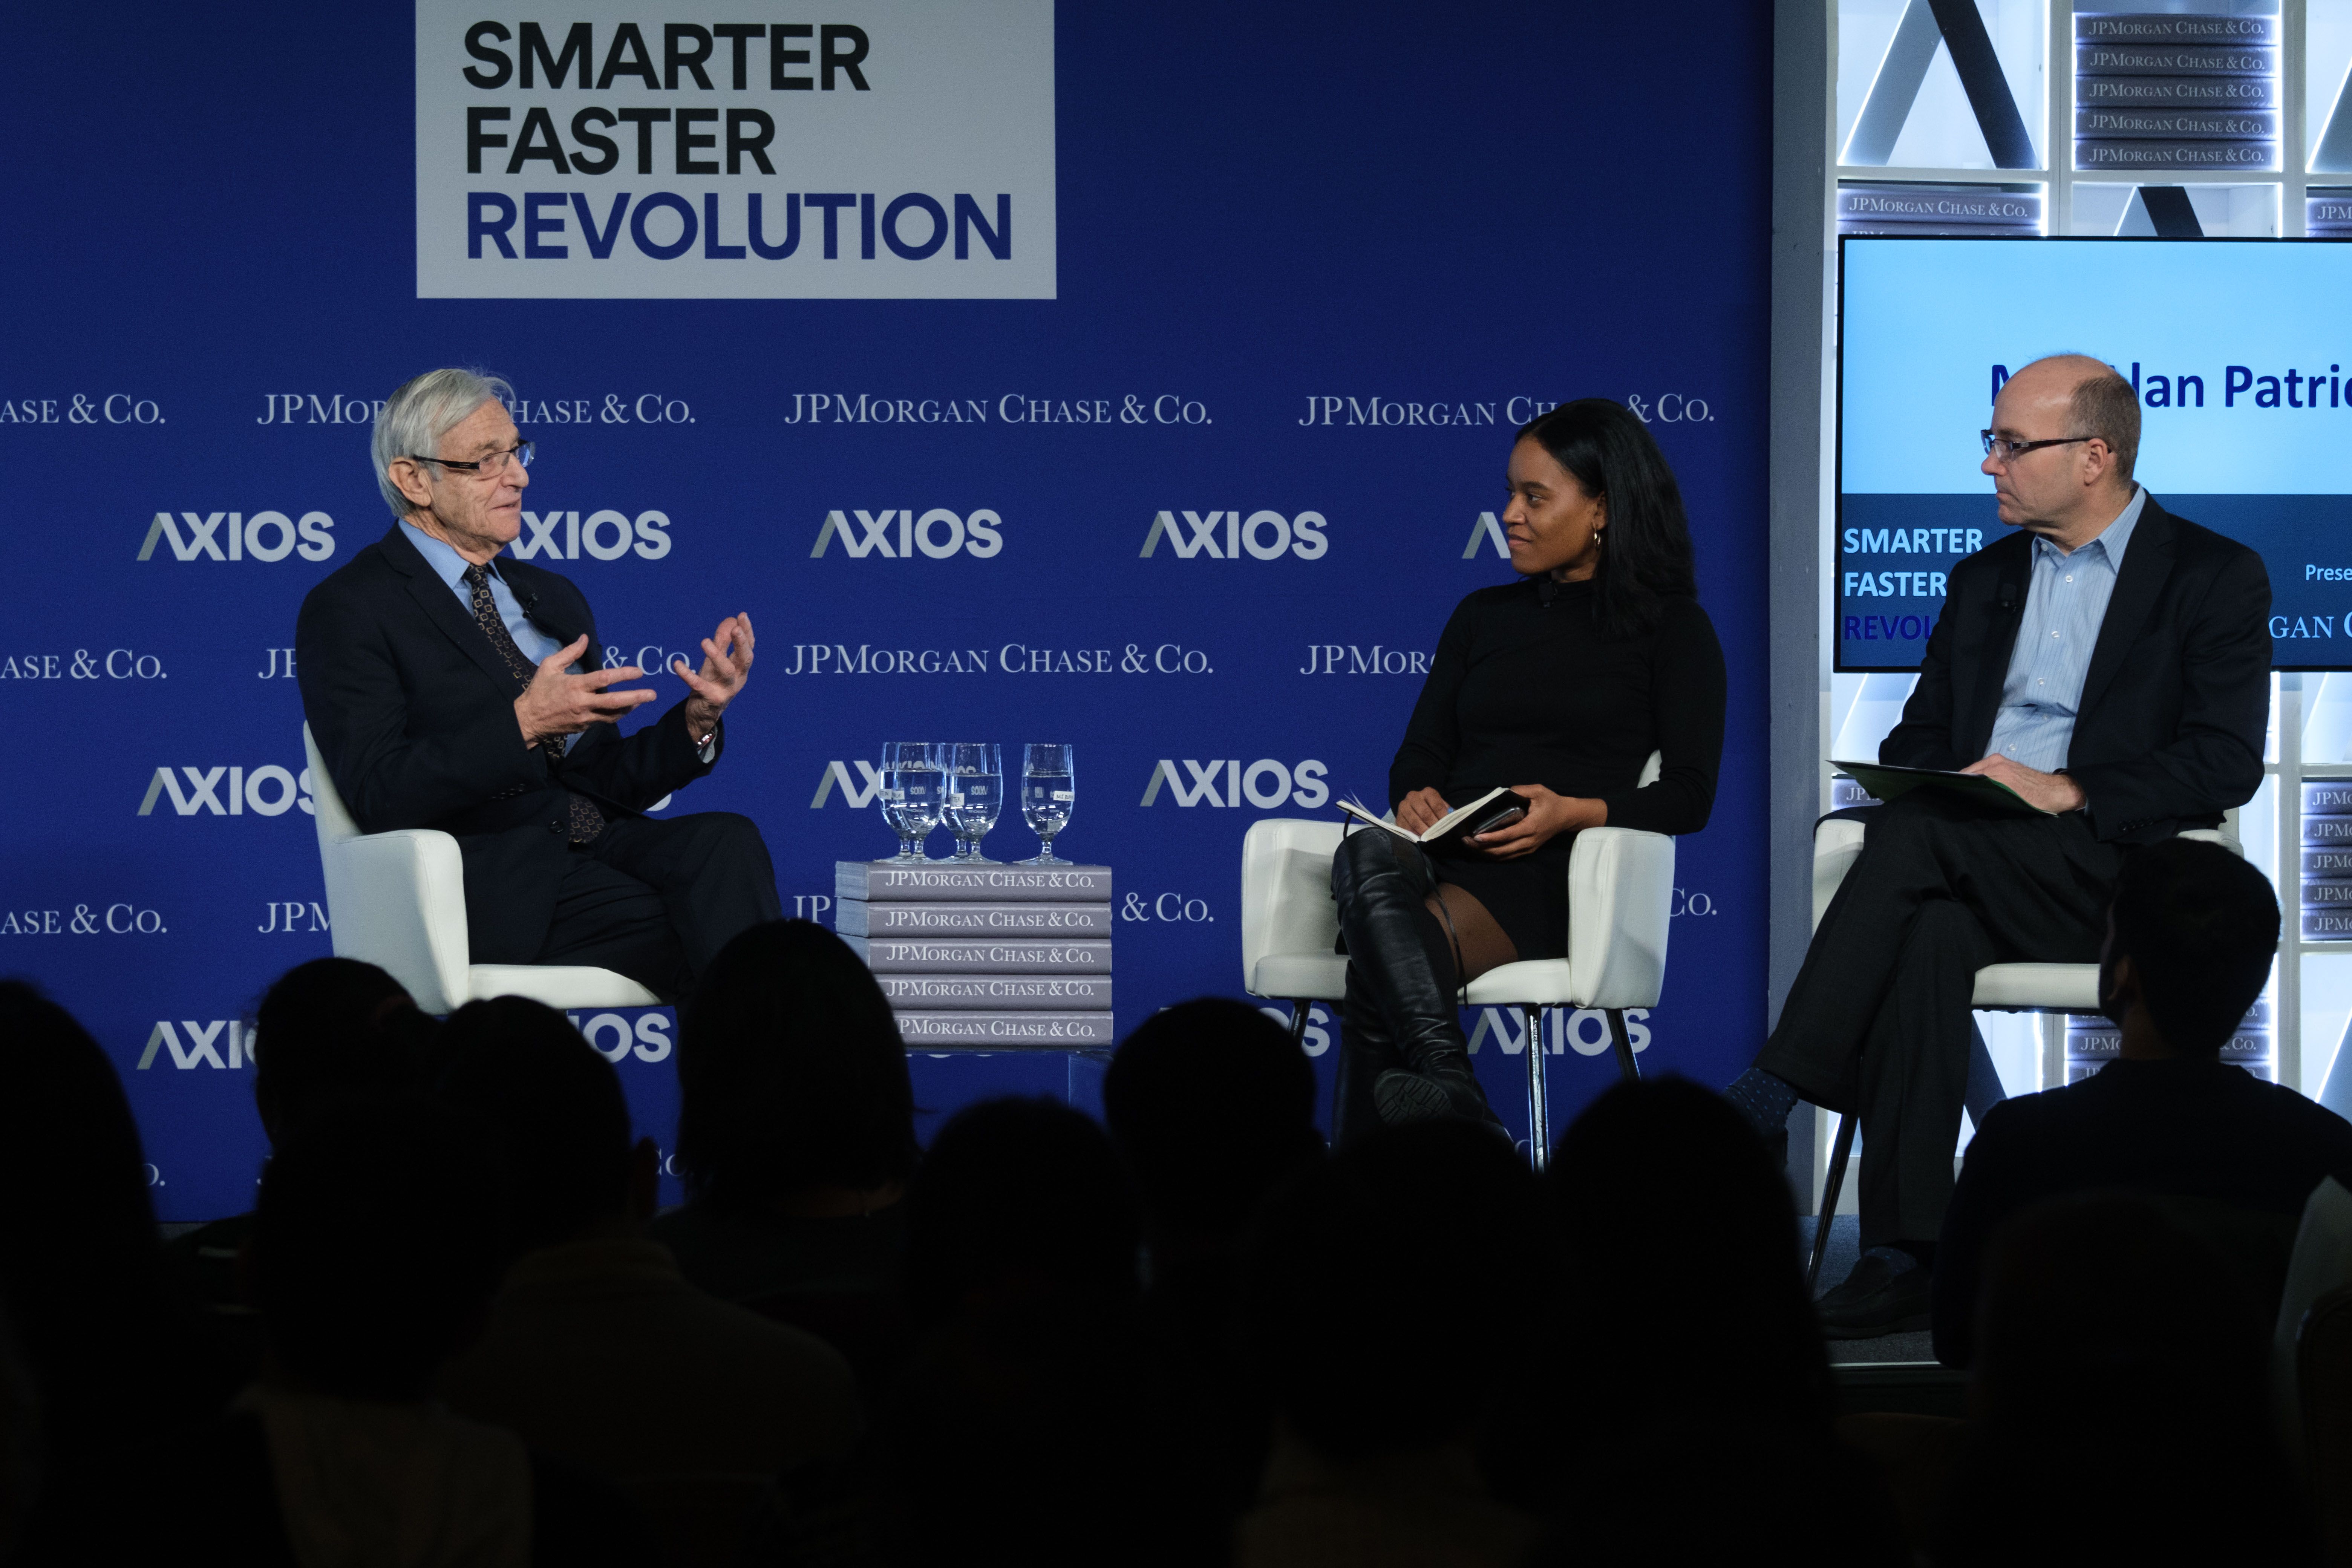 Alan Patricof speaking on stage to Axios' Courtenay Brown and Mike Allen